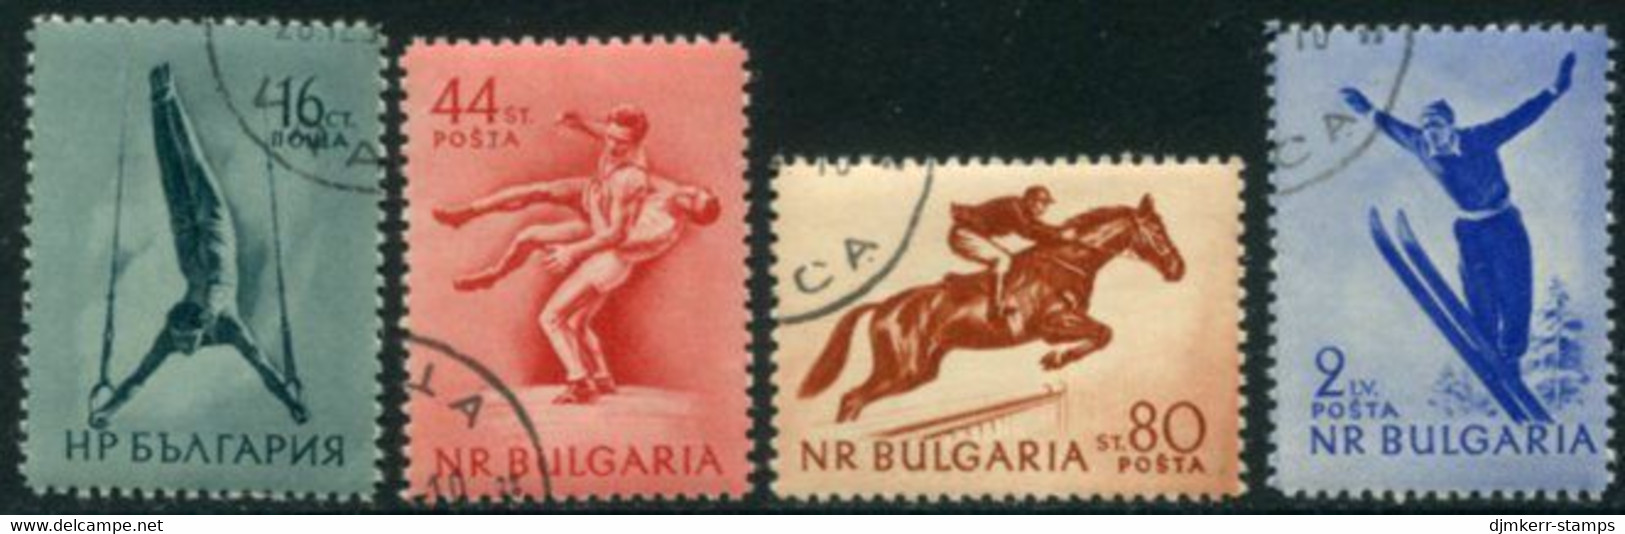 BULGARIA 1954 Sports Used .  Michel 928-31 - Used Stamps